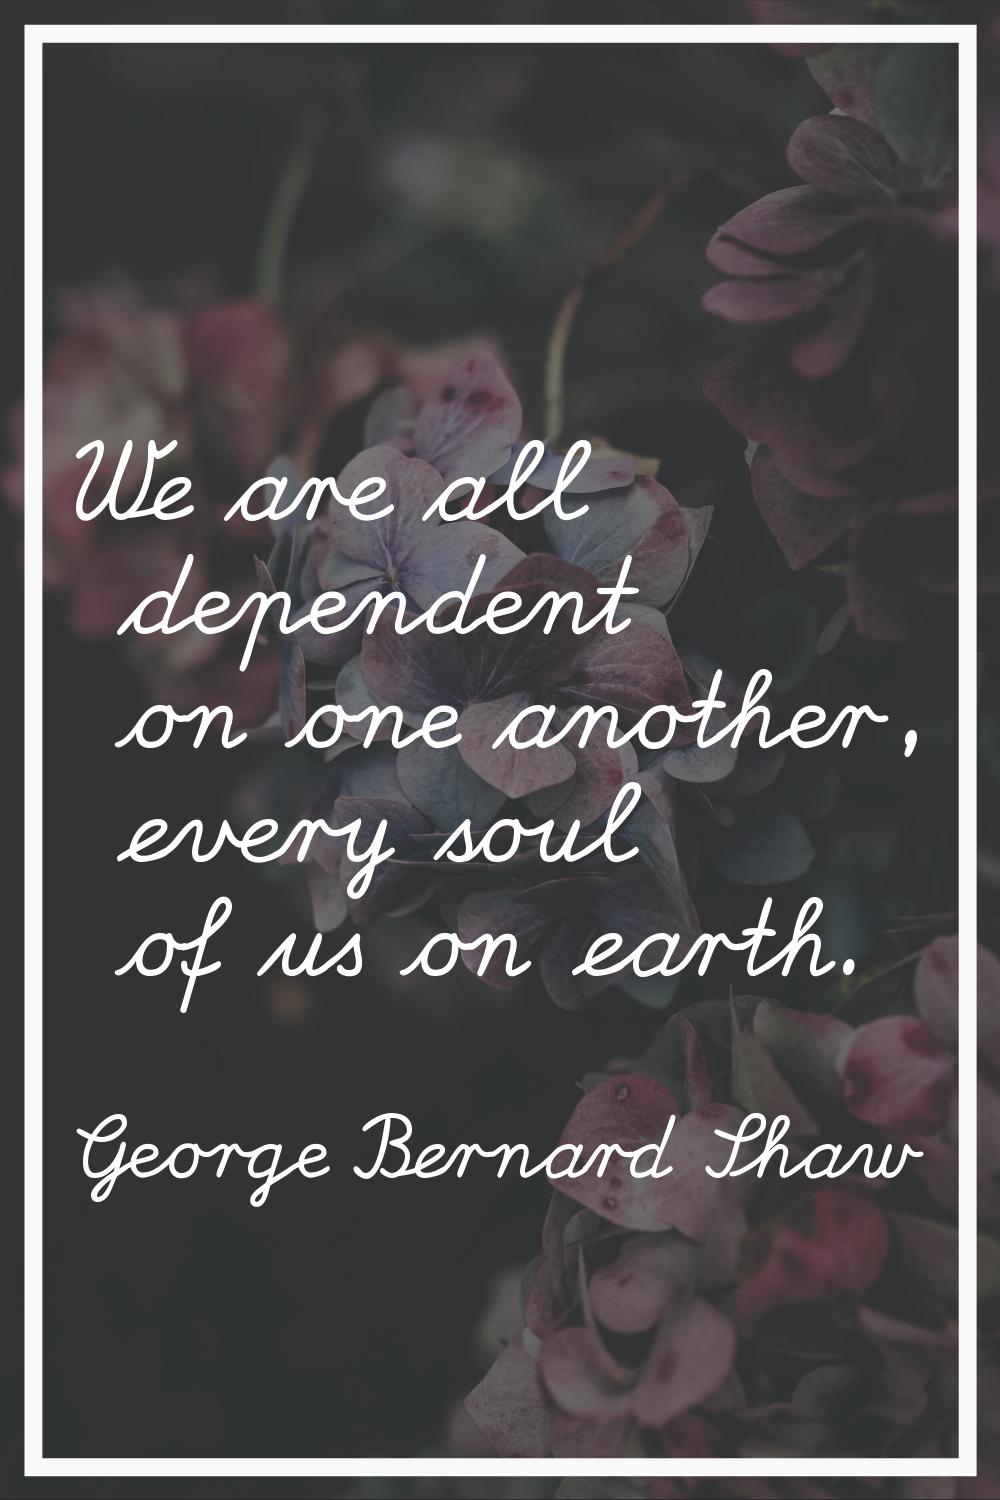 We are all dependent on one another, every soul of us on earth.